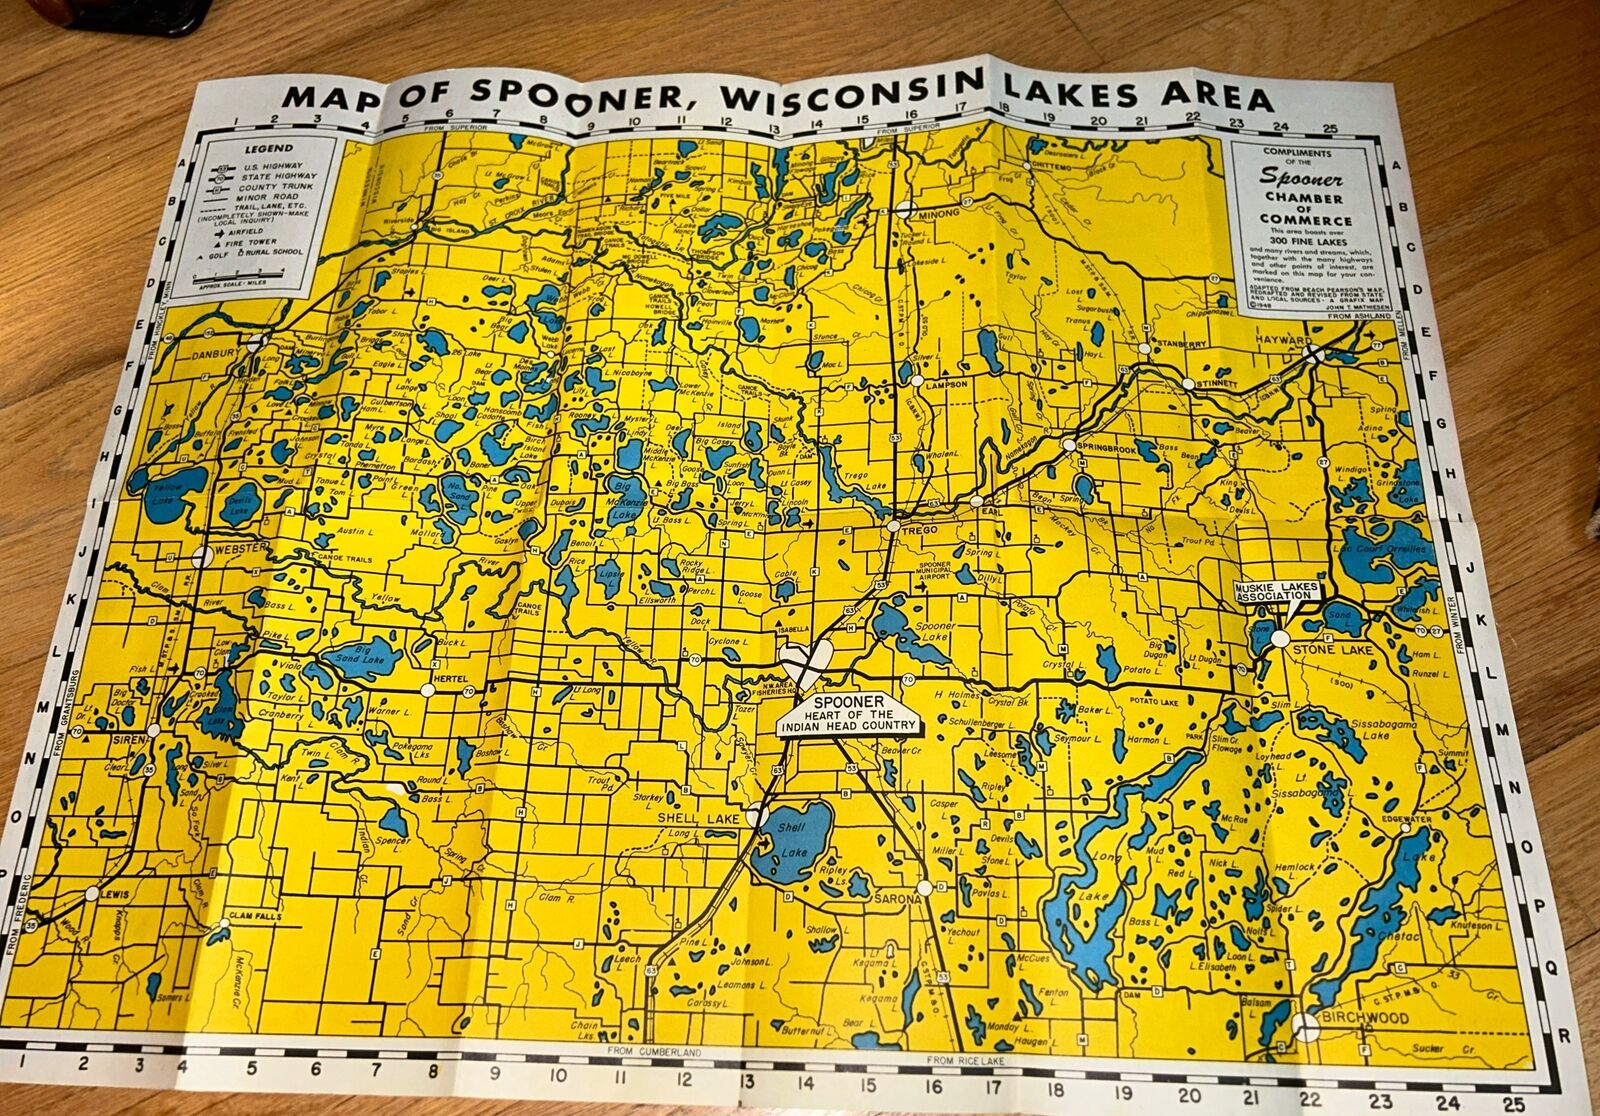 1948 RECREATION GUIDE TO SPOONER AREA Wisconsin / INDIAN HEAD COUNTRY Brochure